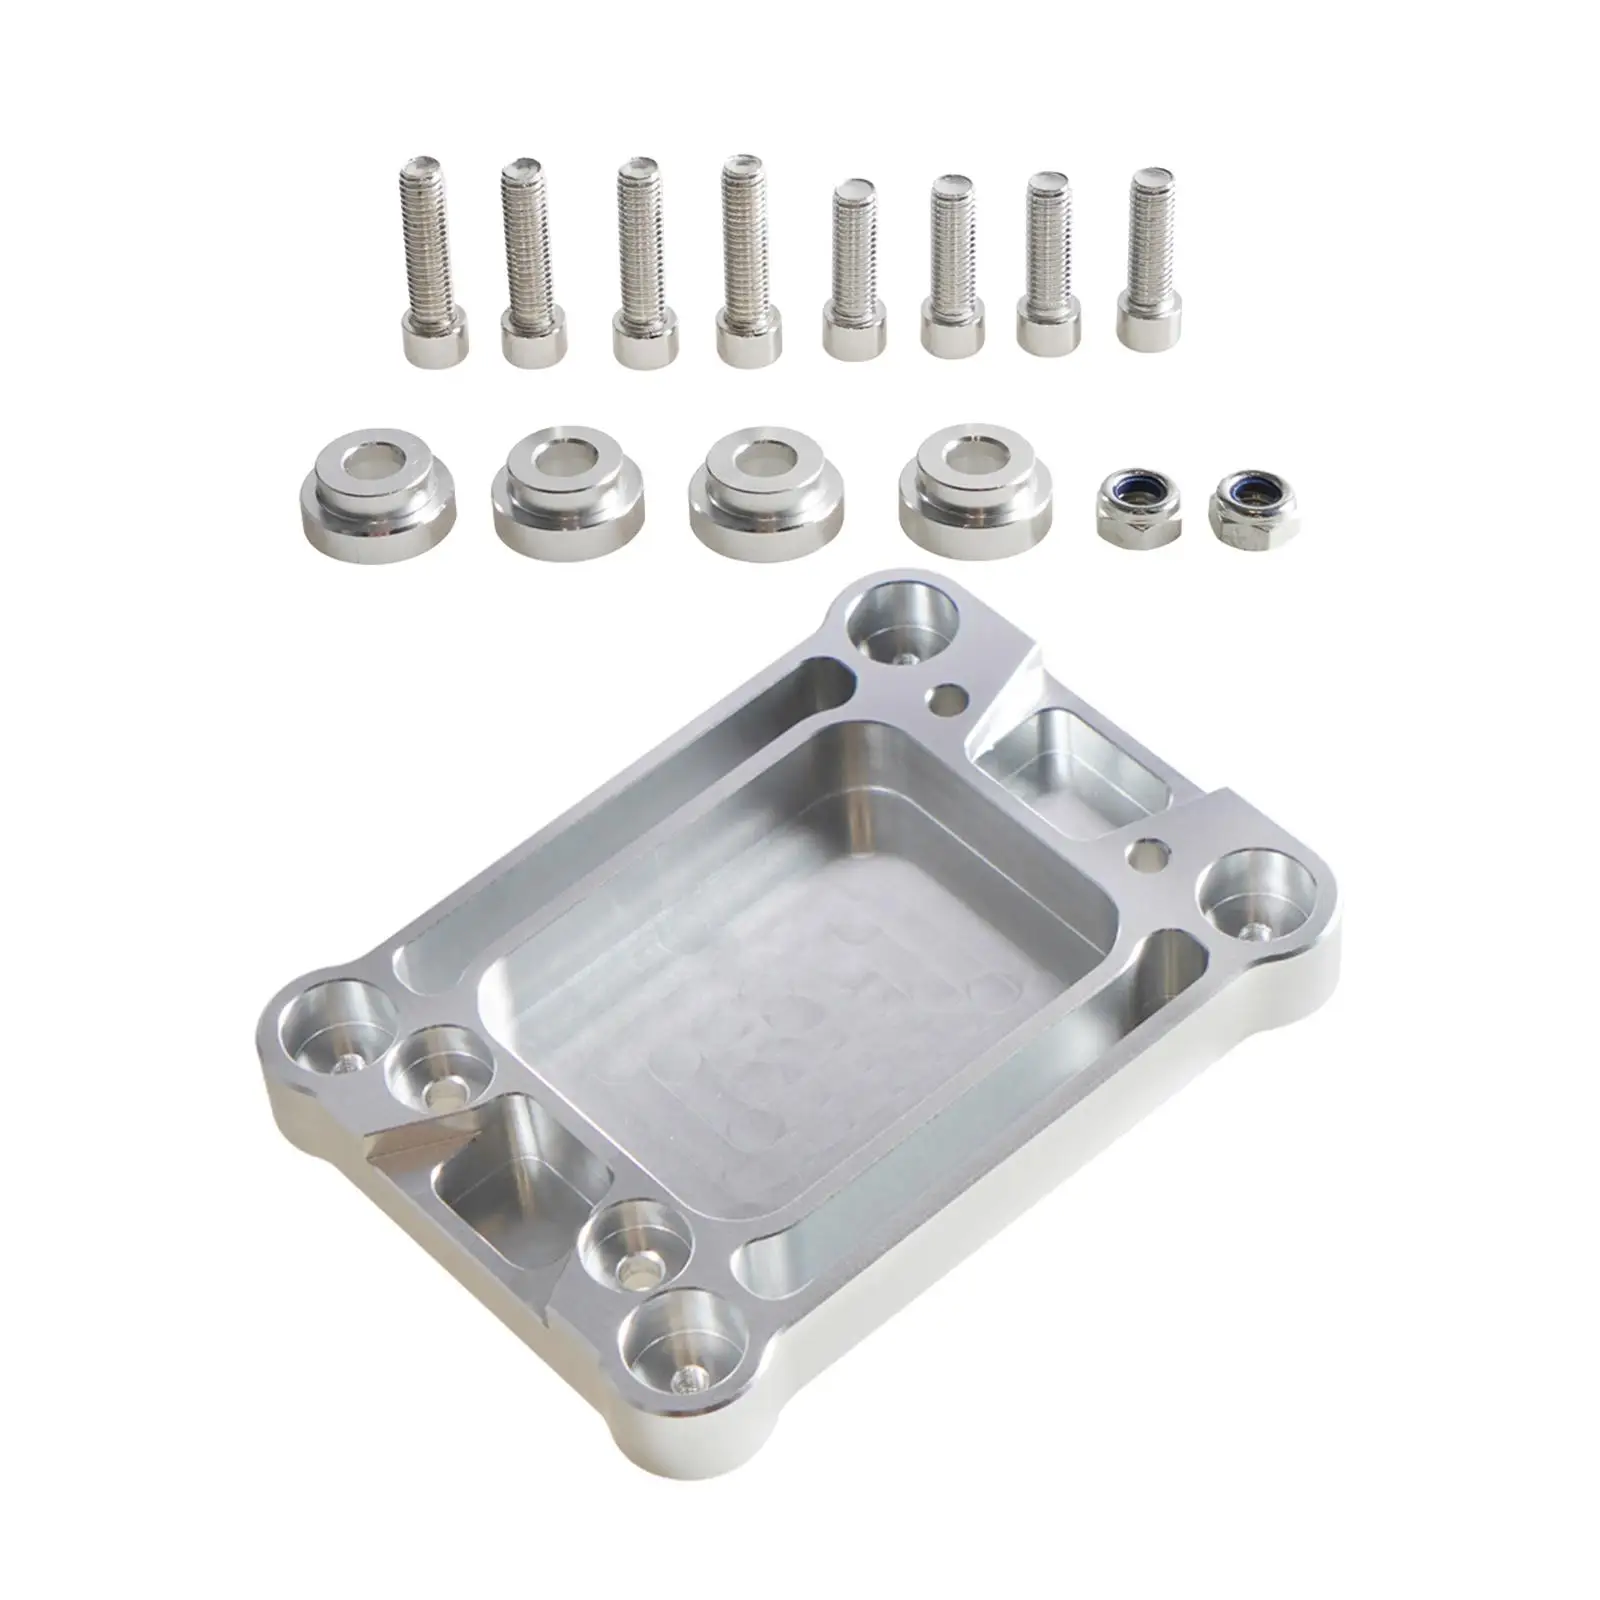 Billet Shifter Box Base Plate professional Parts Shift Lever Base for Acura Integra 1994-2001 Civic 1988-2000